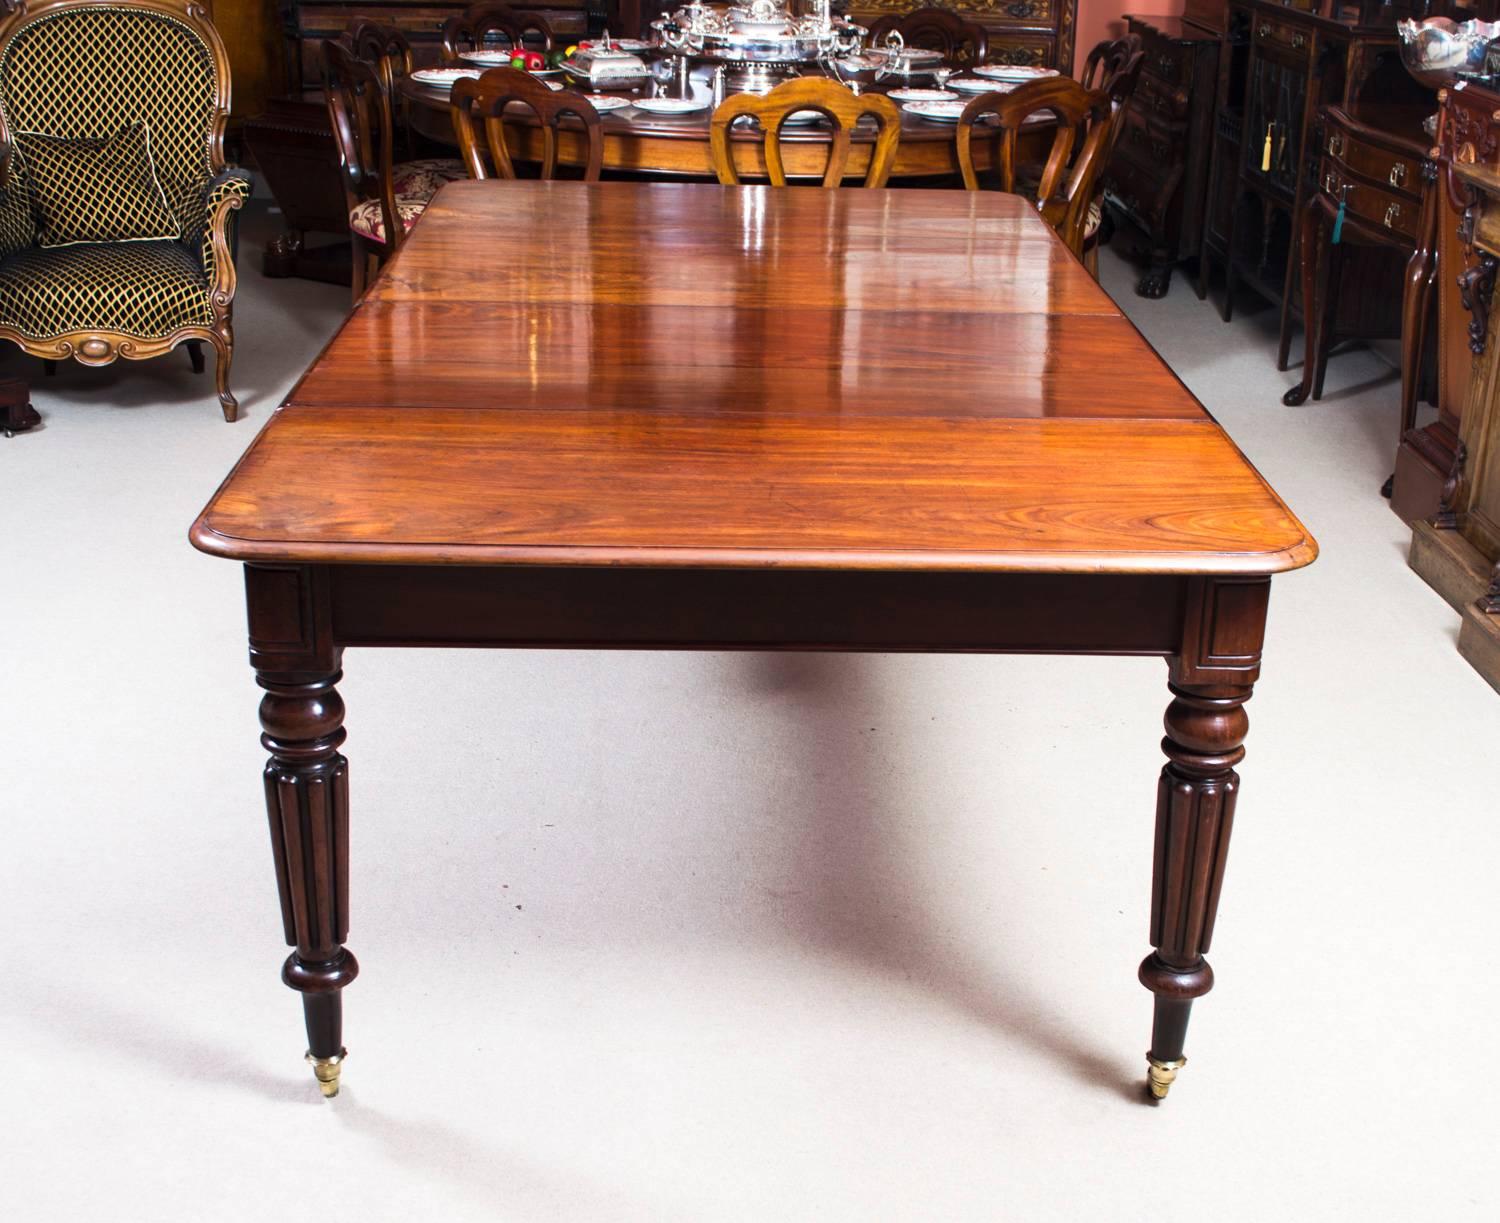 A very rare opportunity to own an antique English Regency dining room table in the manner of Gillows, circa 1820 in date, with a set of eight vintage admiralty back dining chairs.

This amazing table has two original leaves, can sit eight people